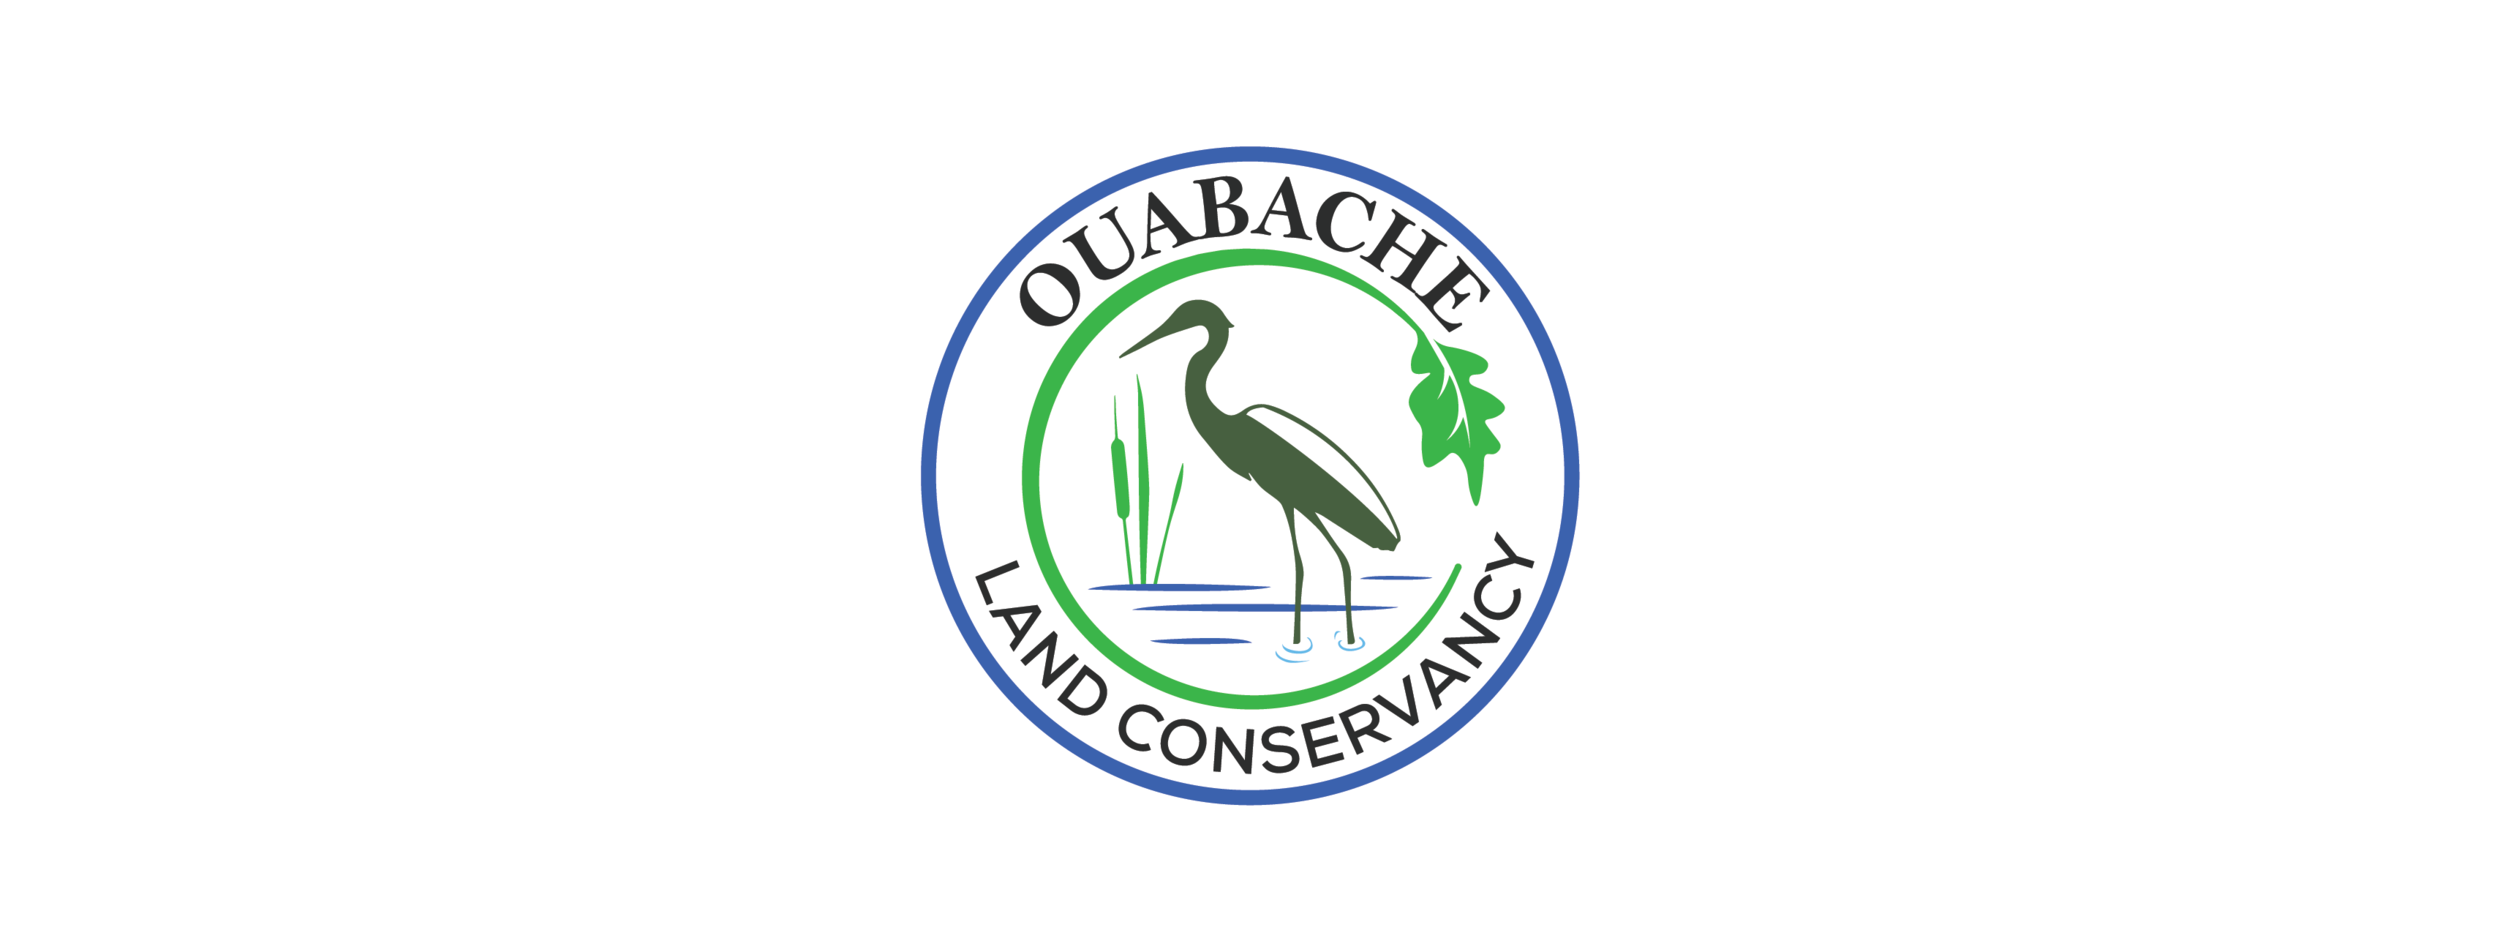 Donate  The Clear Lake Township Land Conservancy - Steuben County, Indiana  